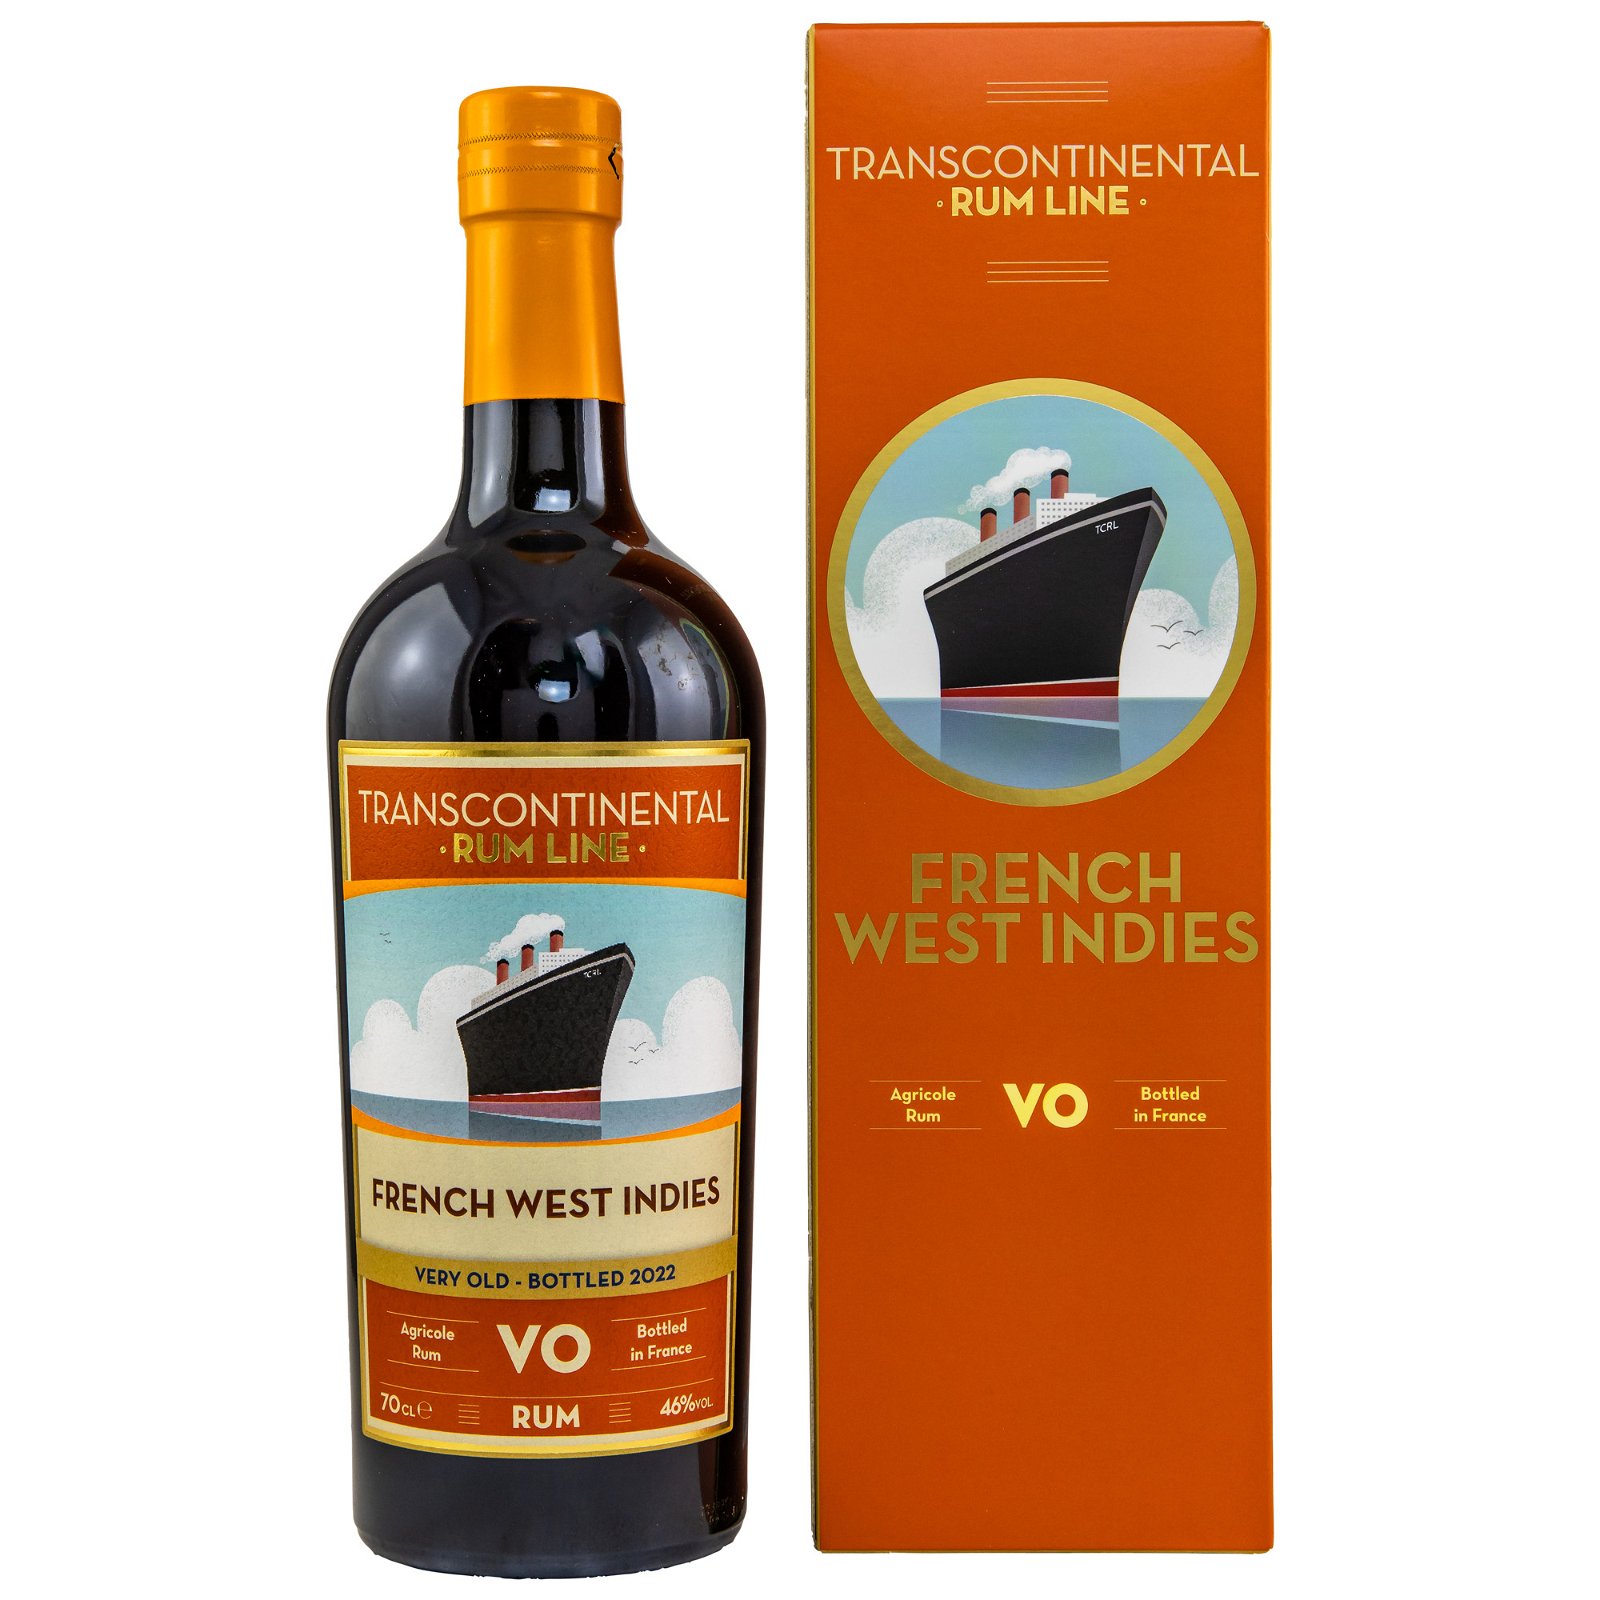 French West Indies 2022 VO Agricole Rum Transcontinental Rum Line